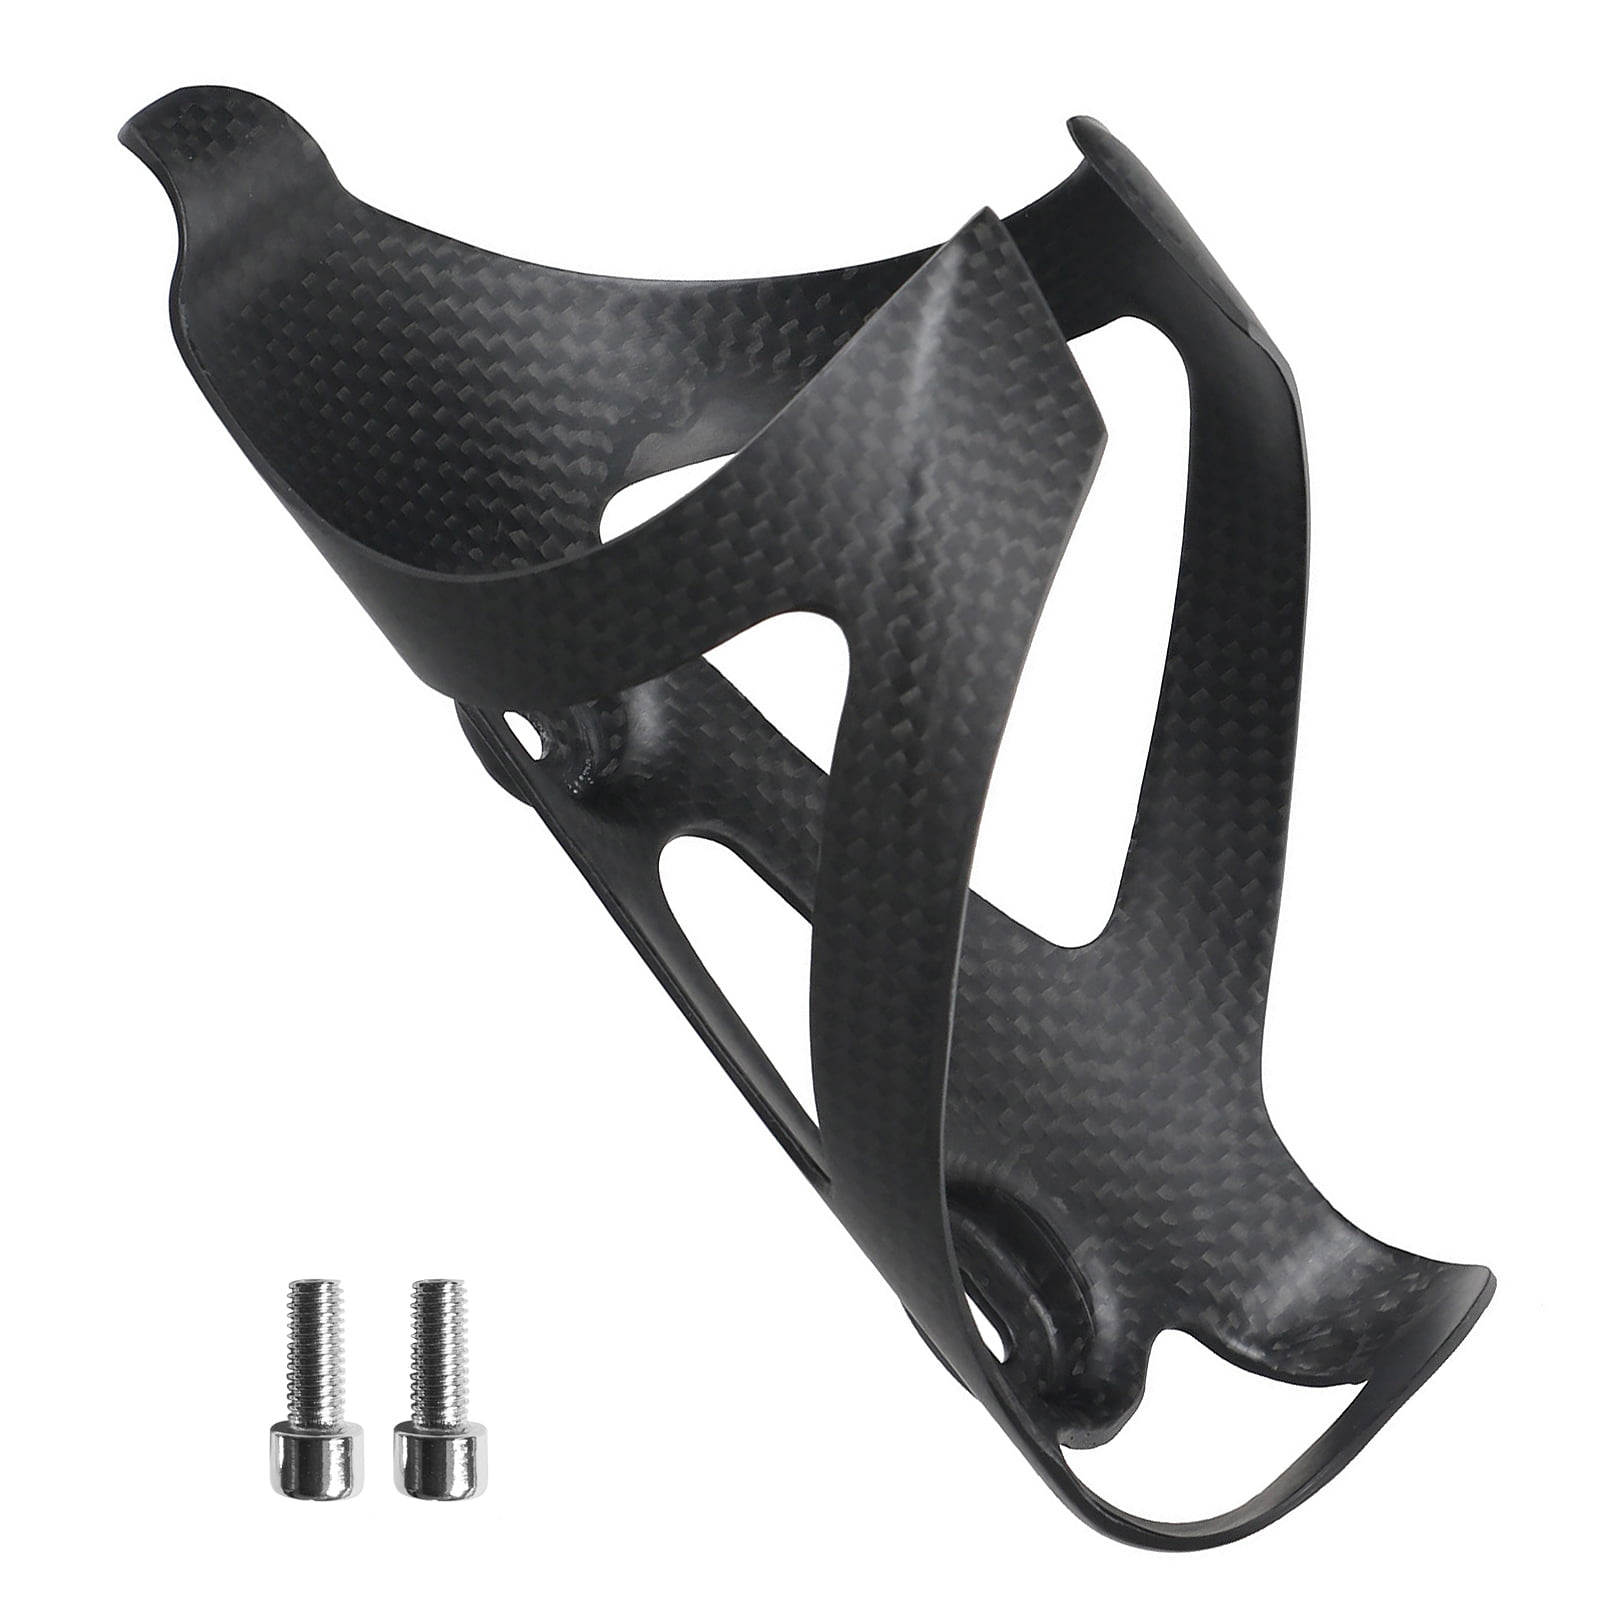 EC90 Full Carbon Fiber Bike Water Bottle Holder Lightweight Bicycle Bottle Cage for Road Mountain Bikes Cycling 